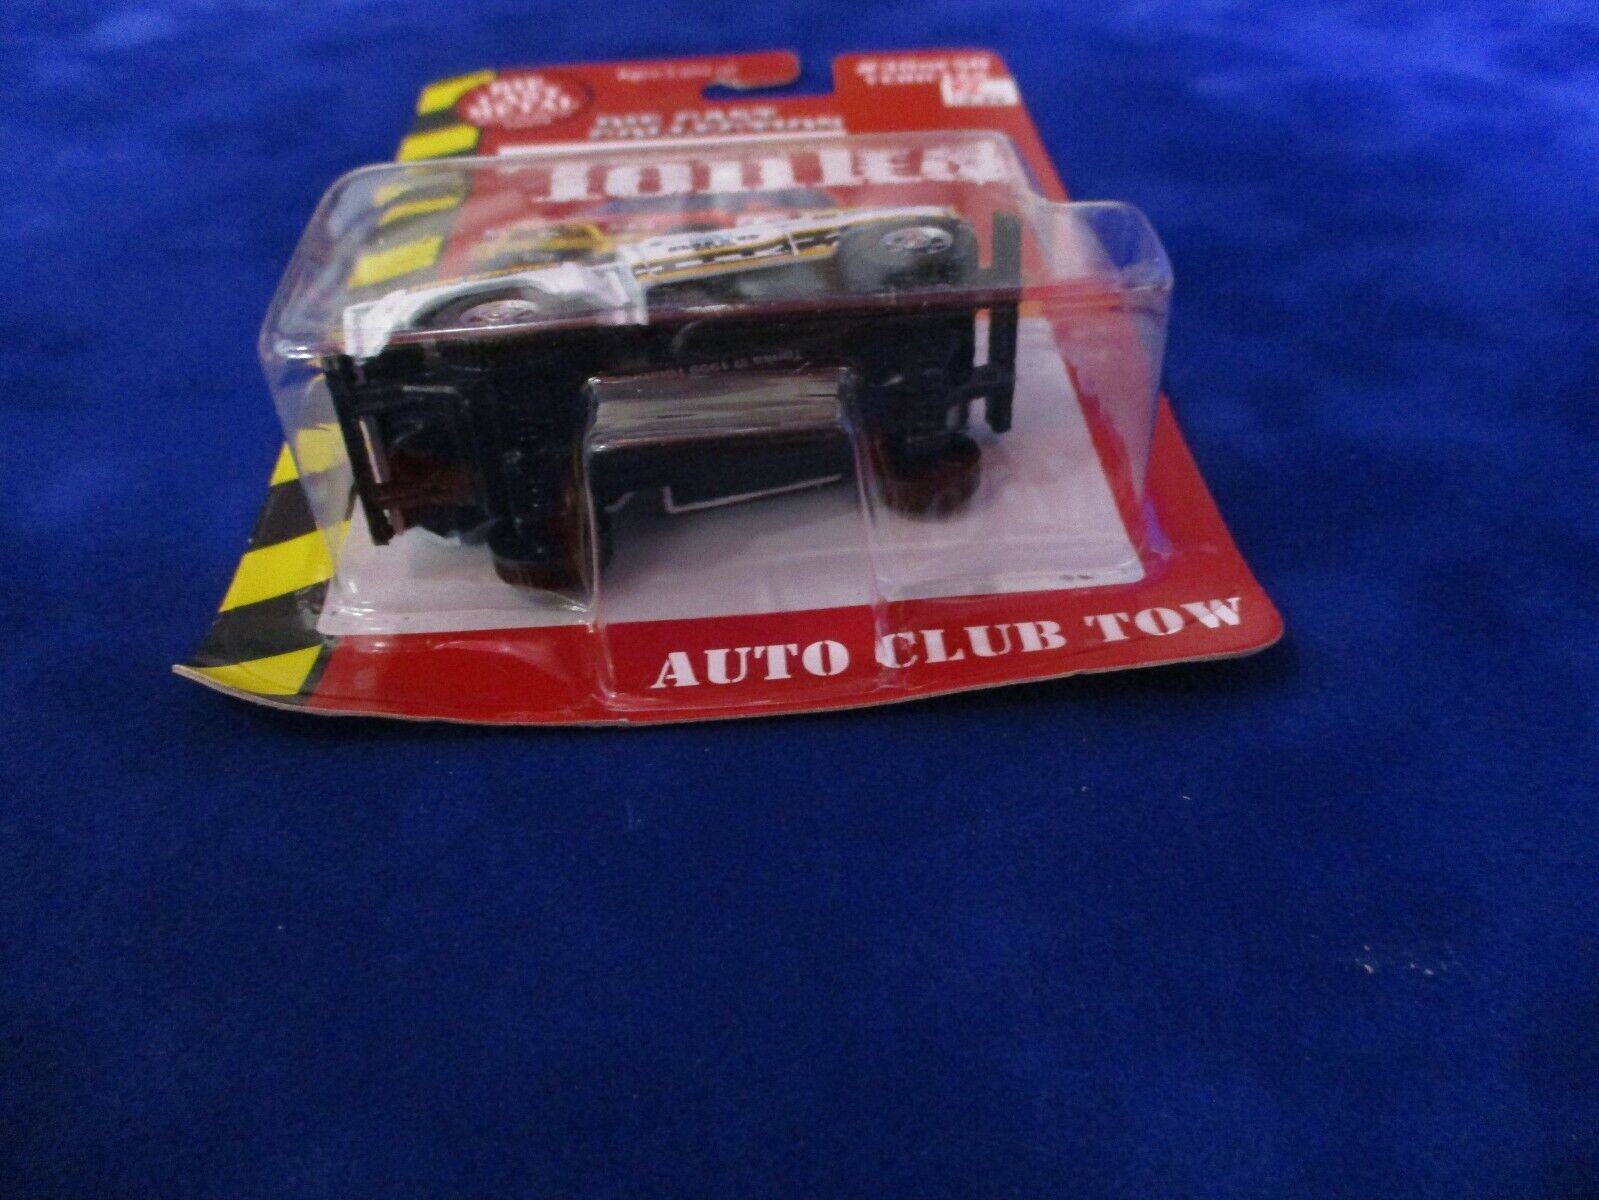 Tonka Die Cast Collection Auto Club Tow 30/50